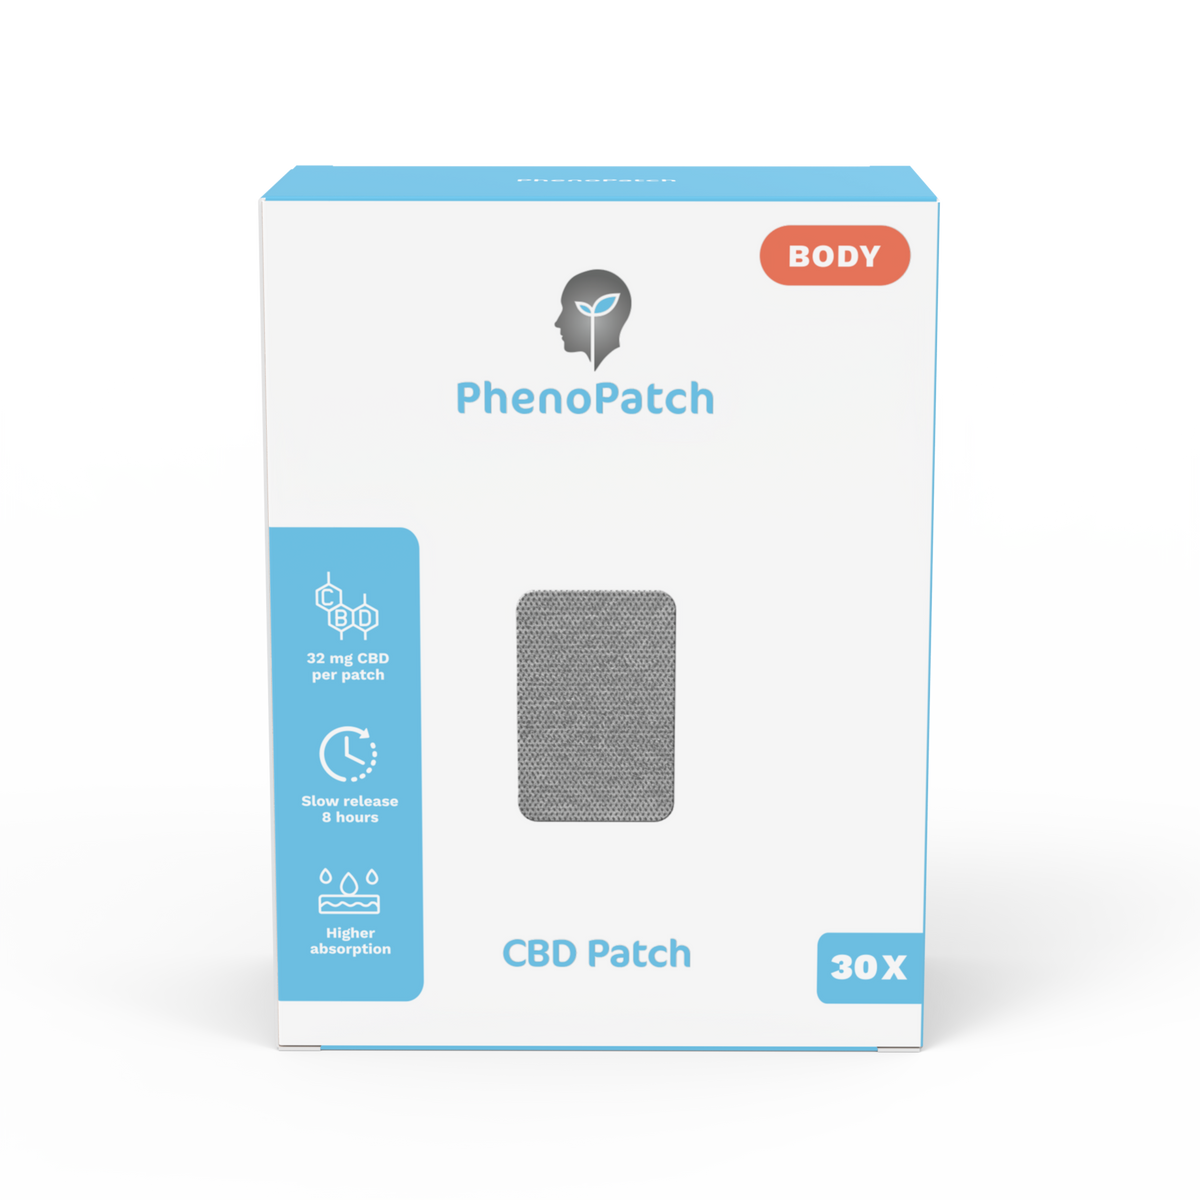 Pheno Patch Body - CBD Targeted Relief for Your Body